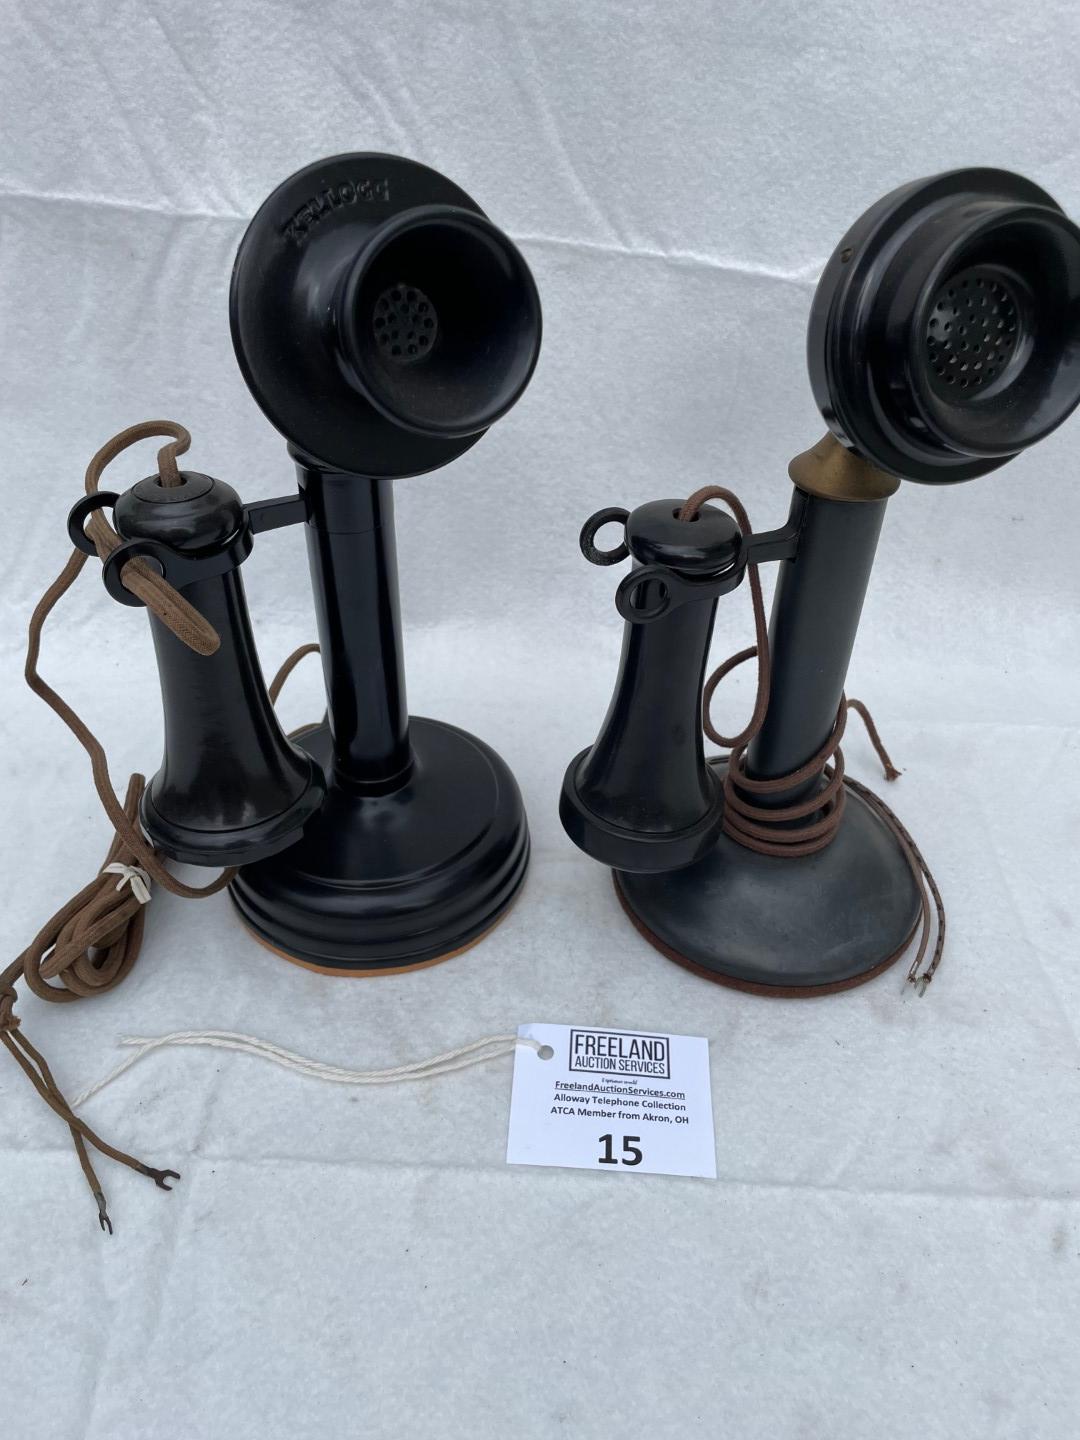 Pair of early 1900s Candlestick Telephones KELLOGG and WESTERN ELECTRIC